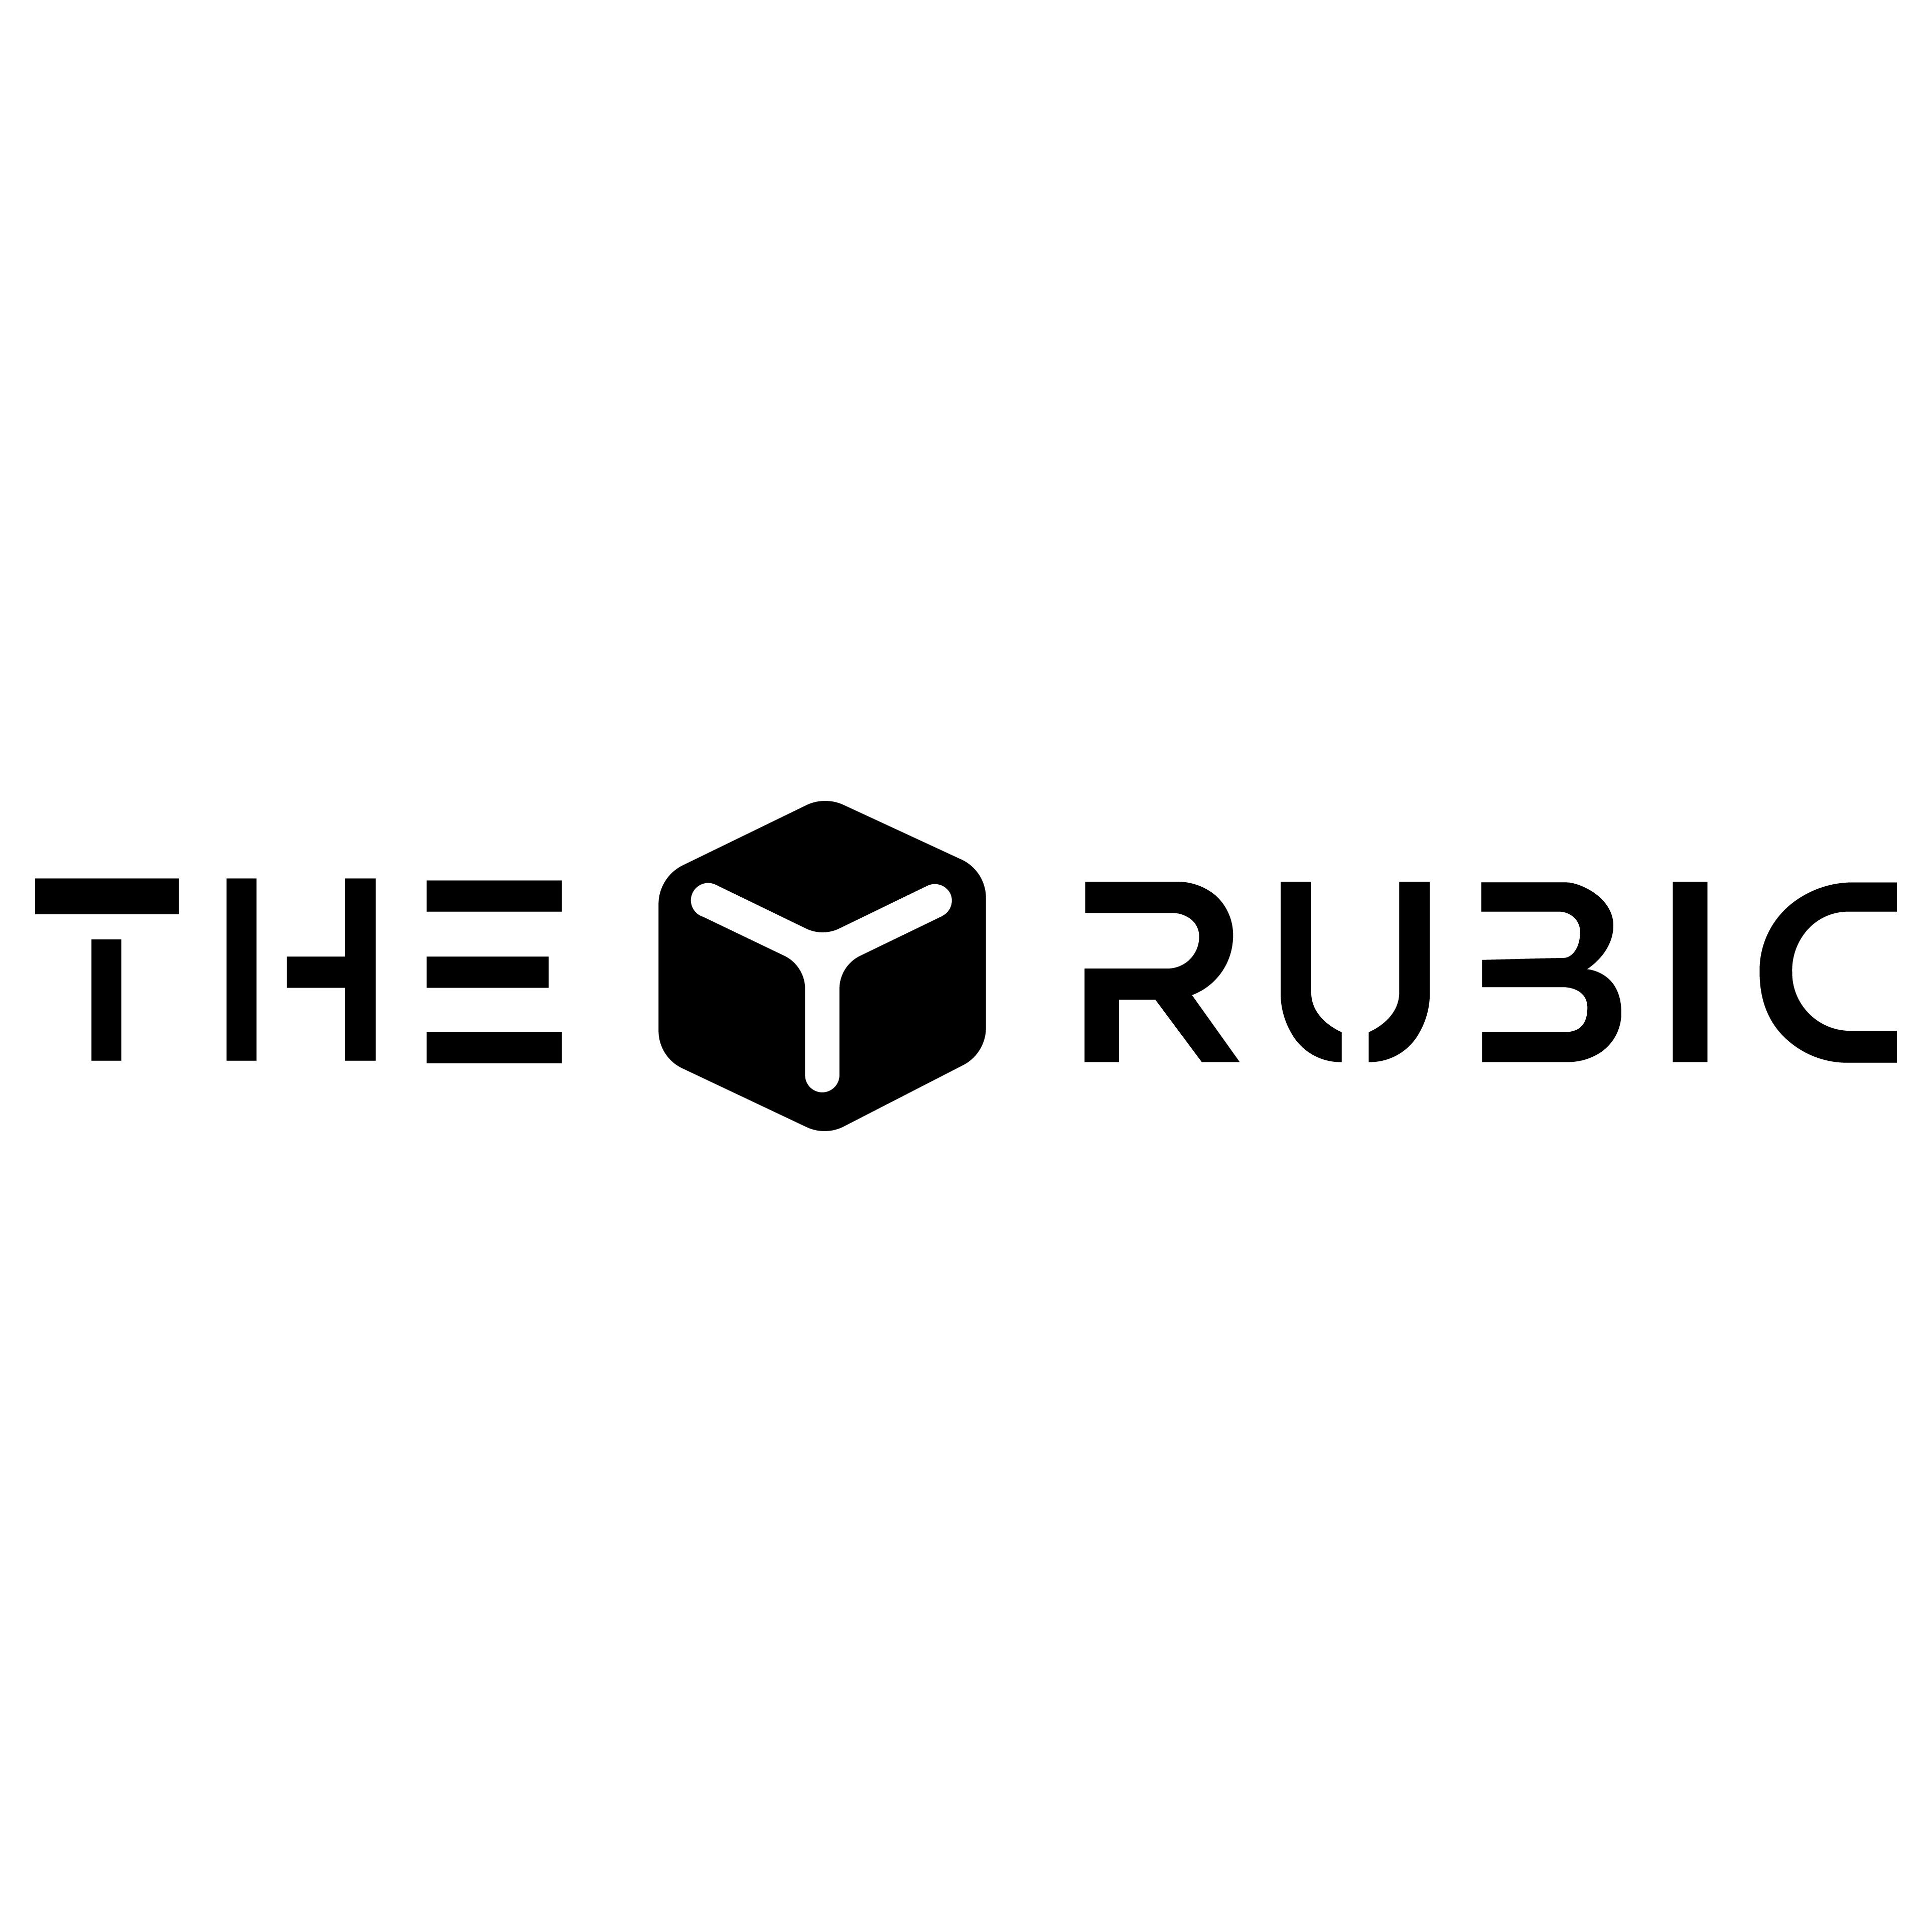 The Rubic square logo on white background